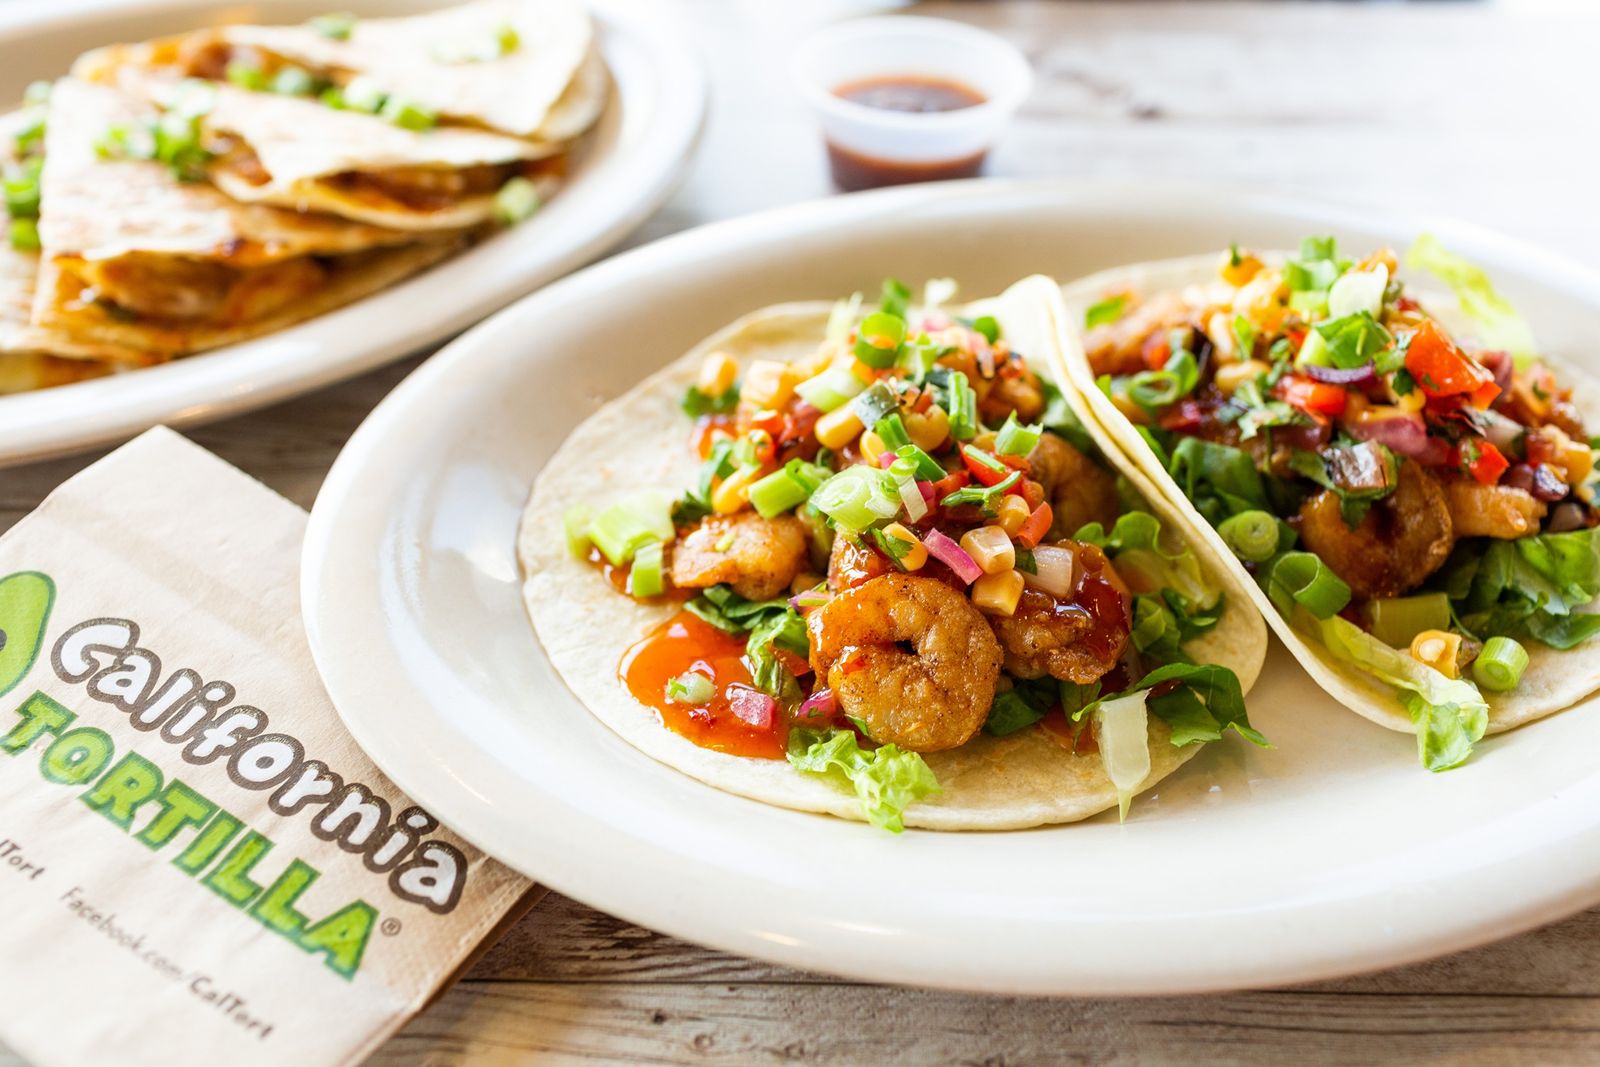 Celebrate National Taco Day At California Tortilla With A Free Taco With Any Purchase